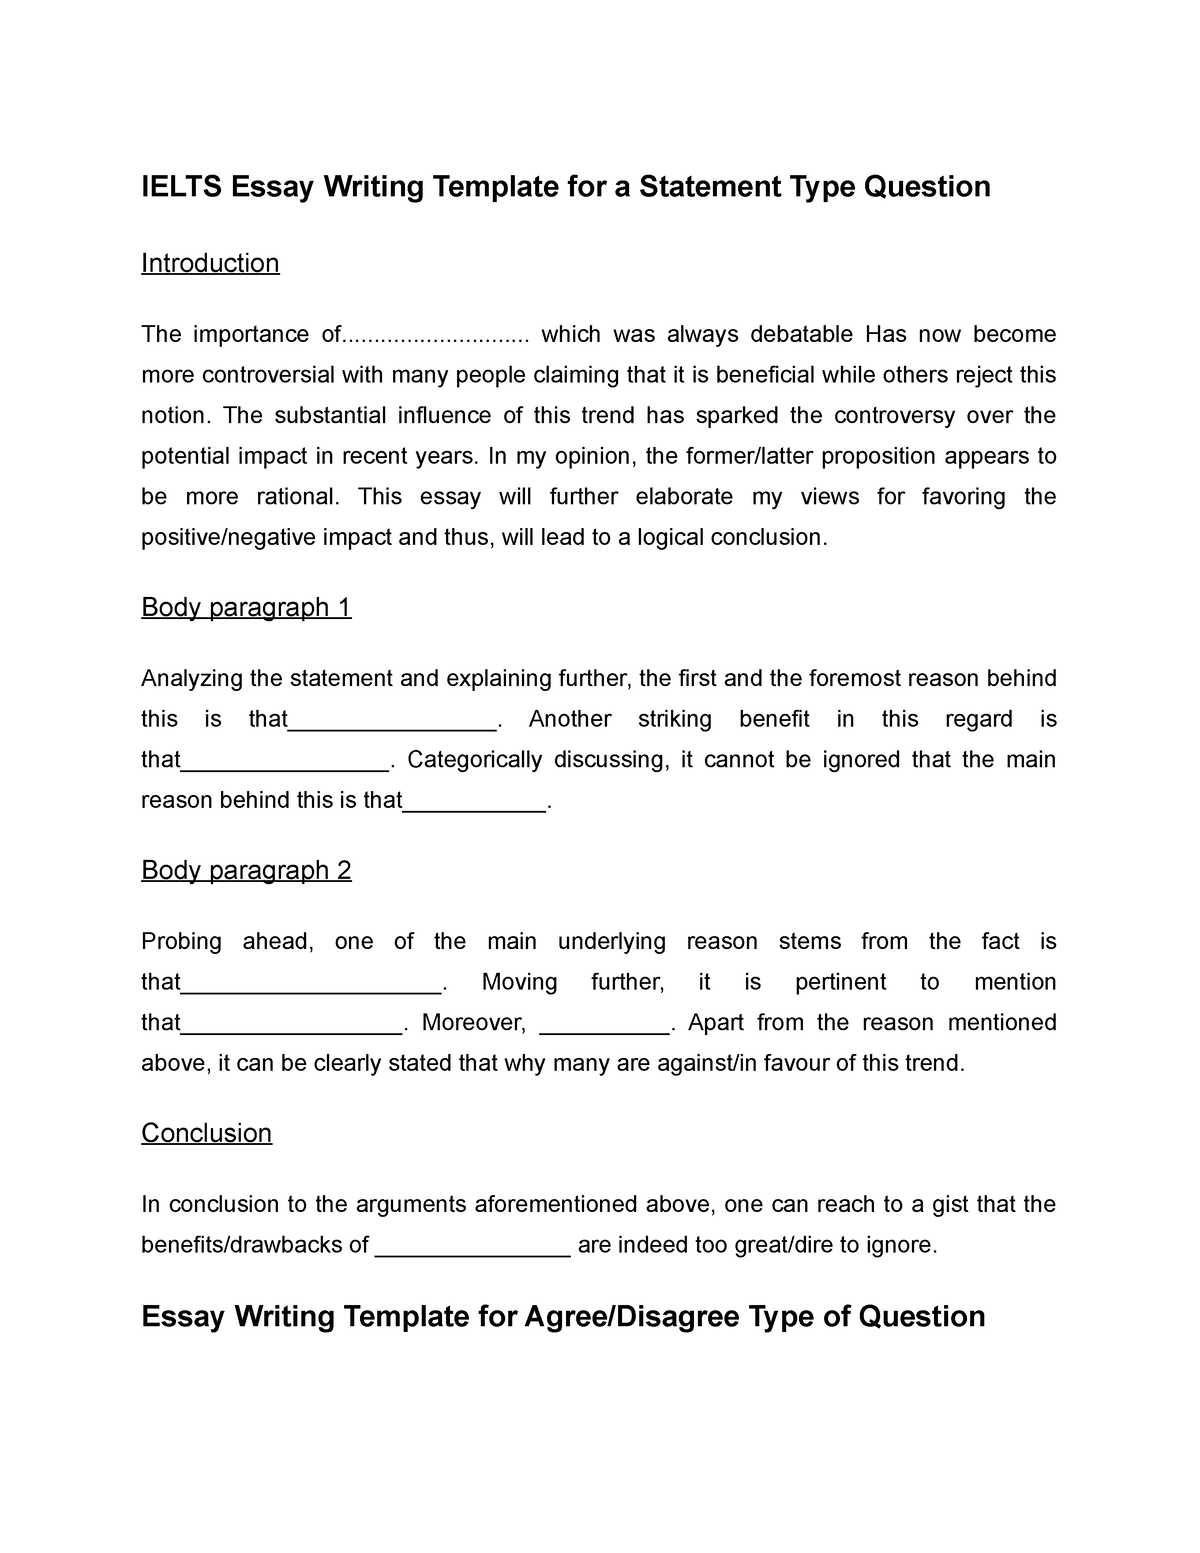 ielts essay writing template for a statement type question